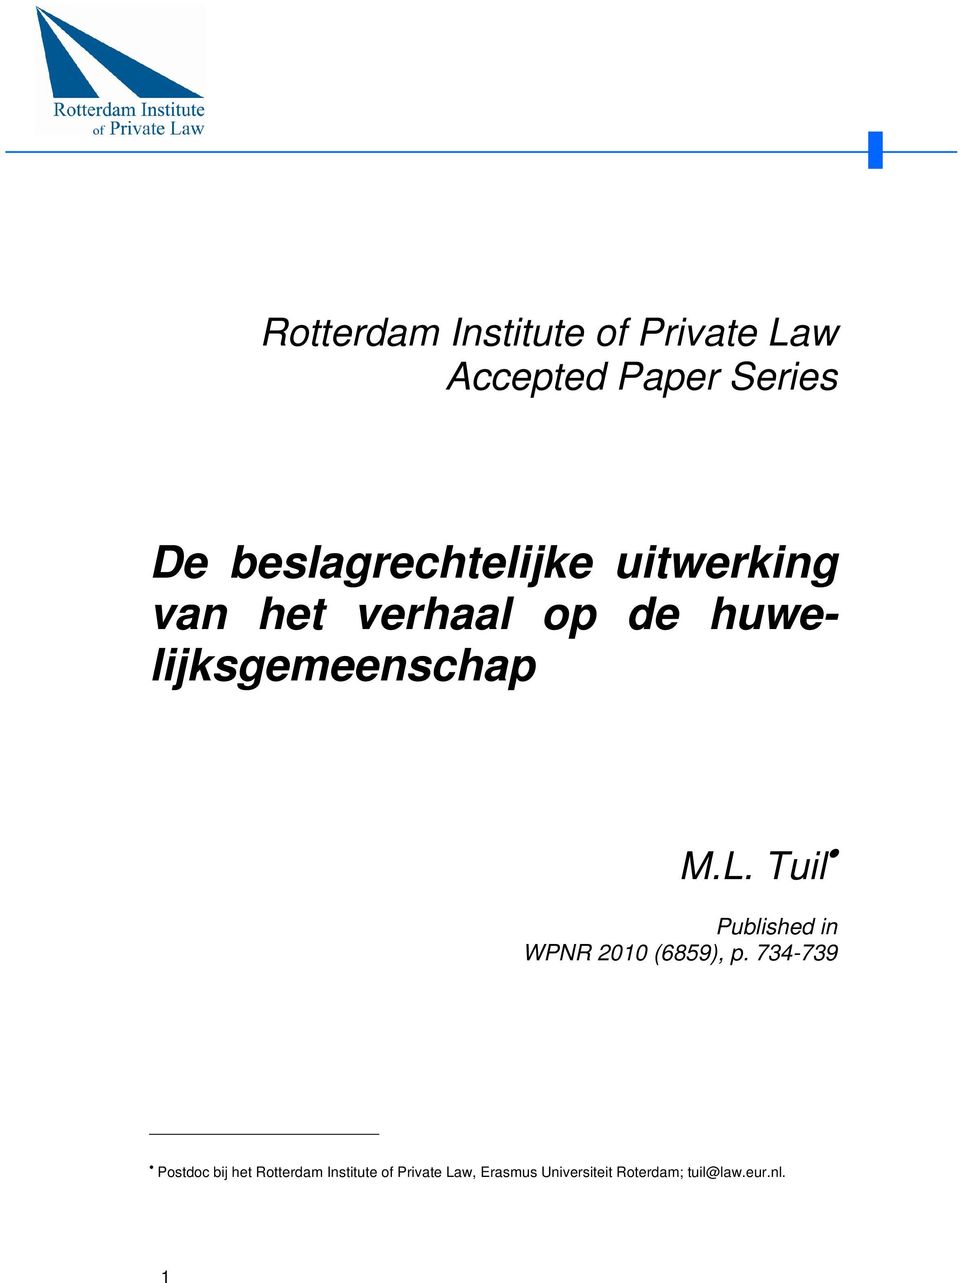 M.L. Tuil Published in WPNR 2010 (6859), p.